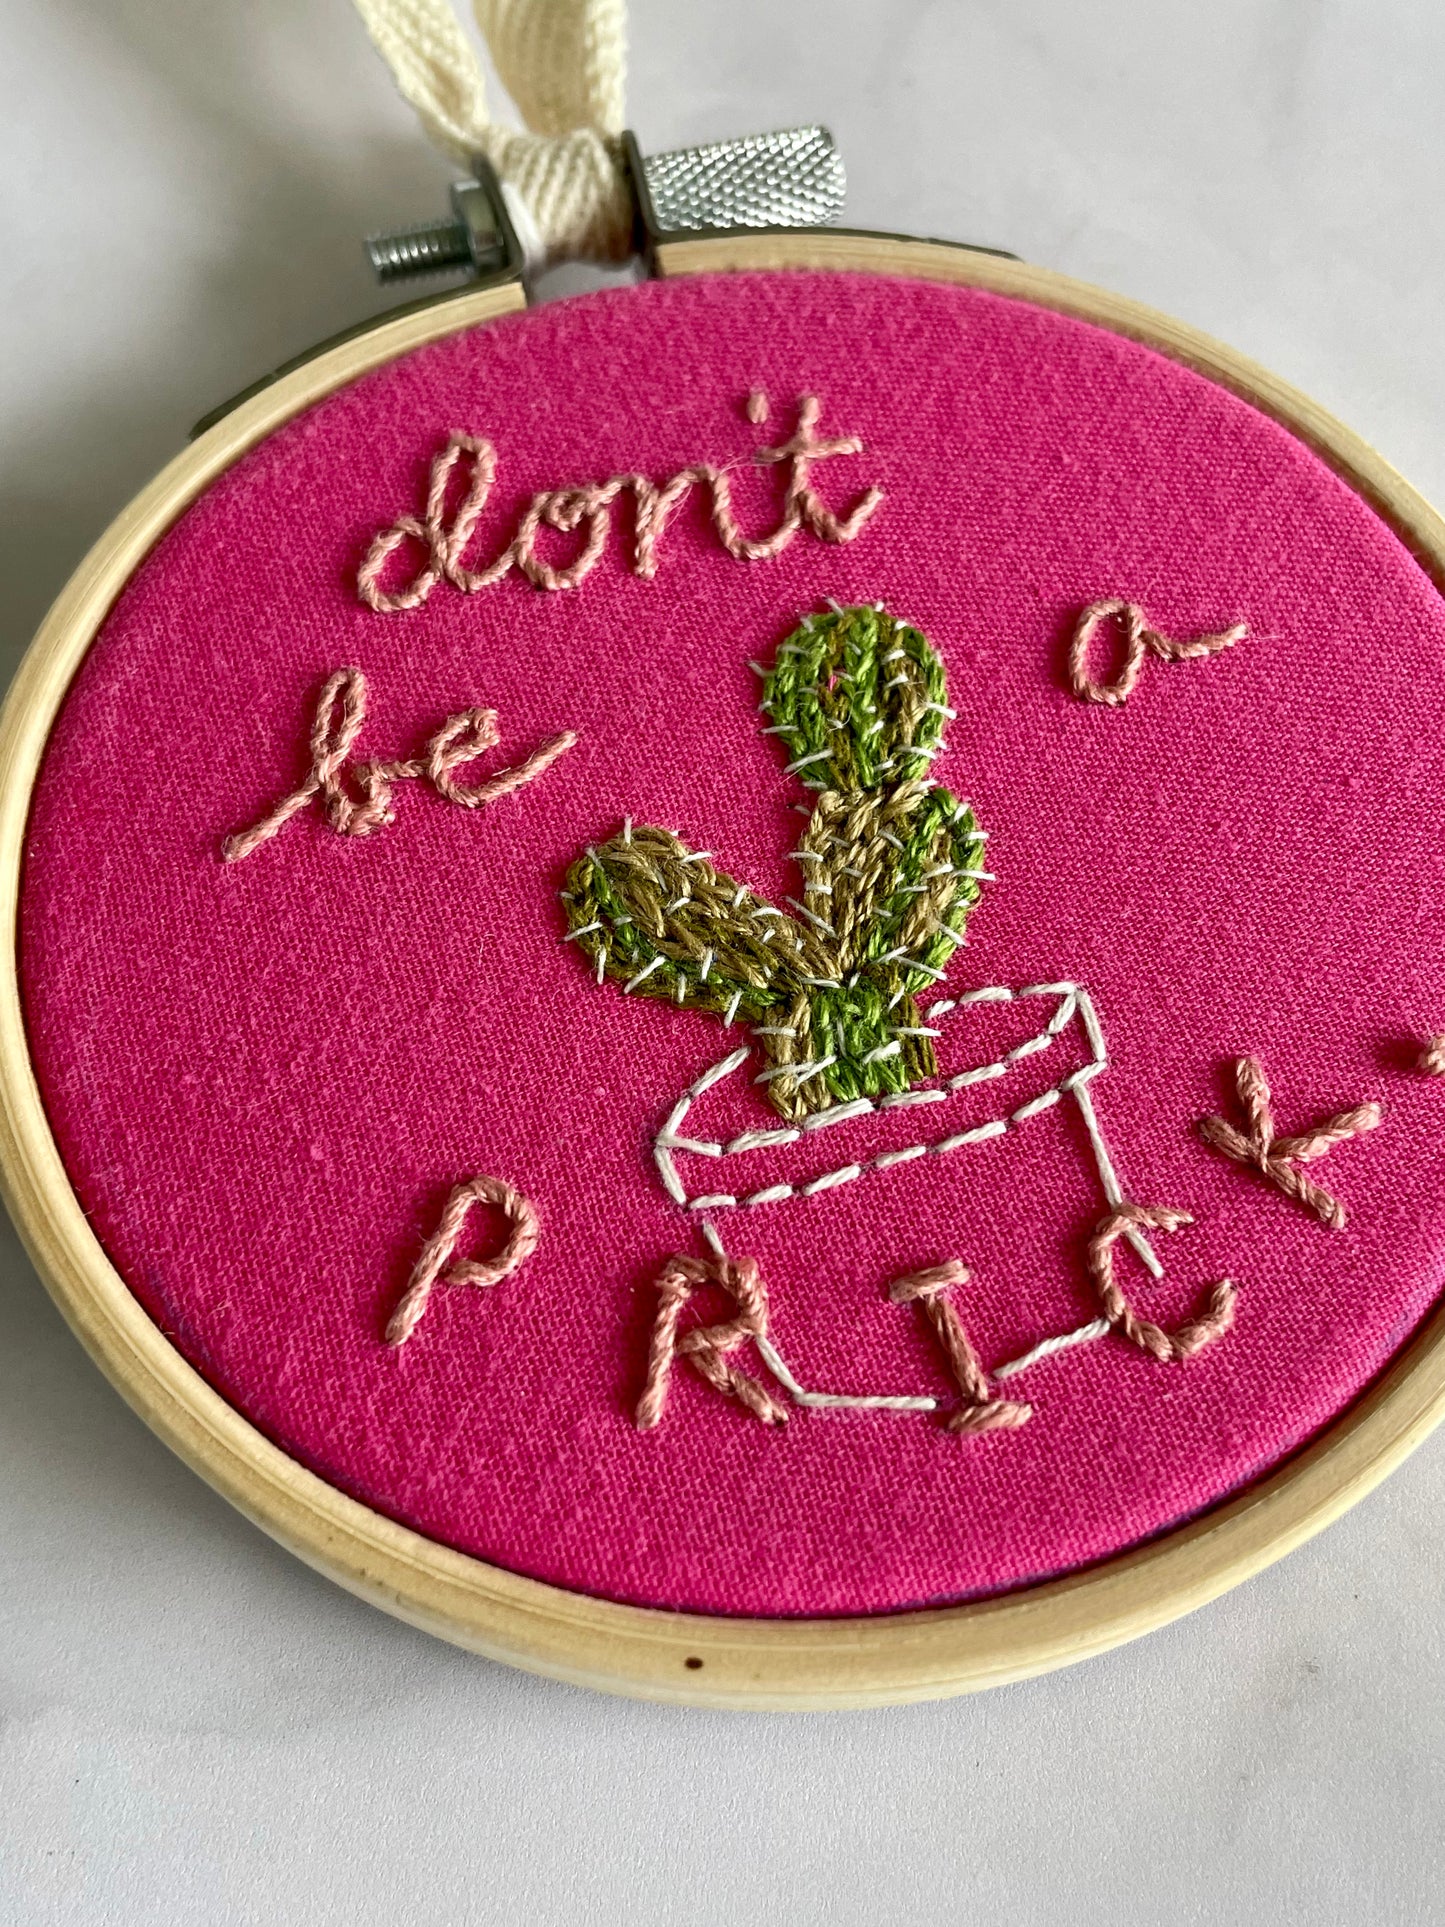 "Don't Be A Prick" 4" Embroidery